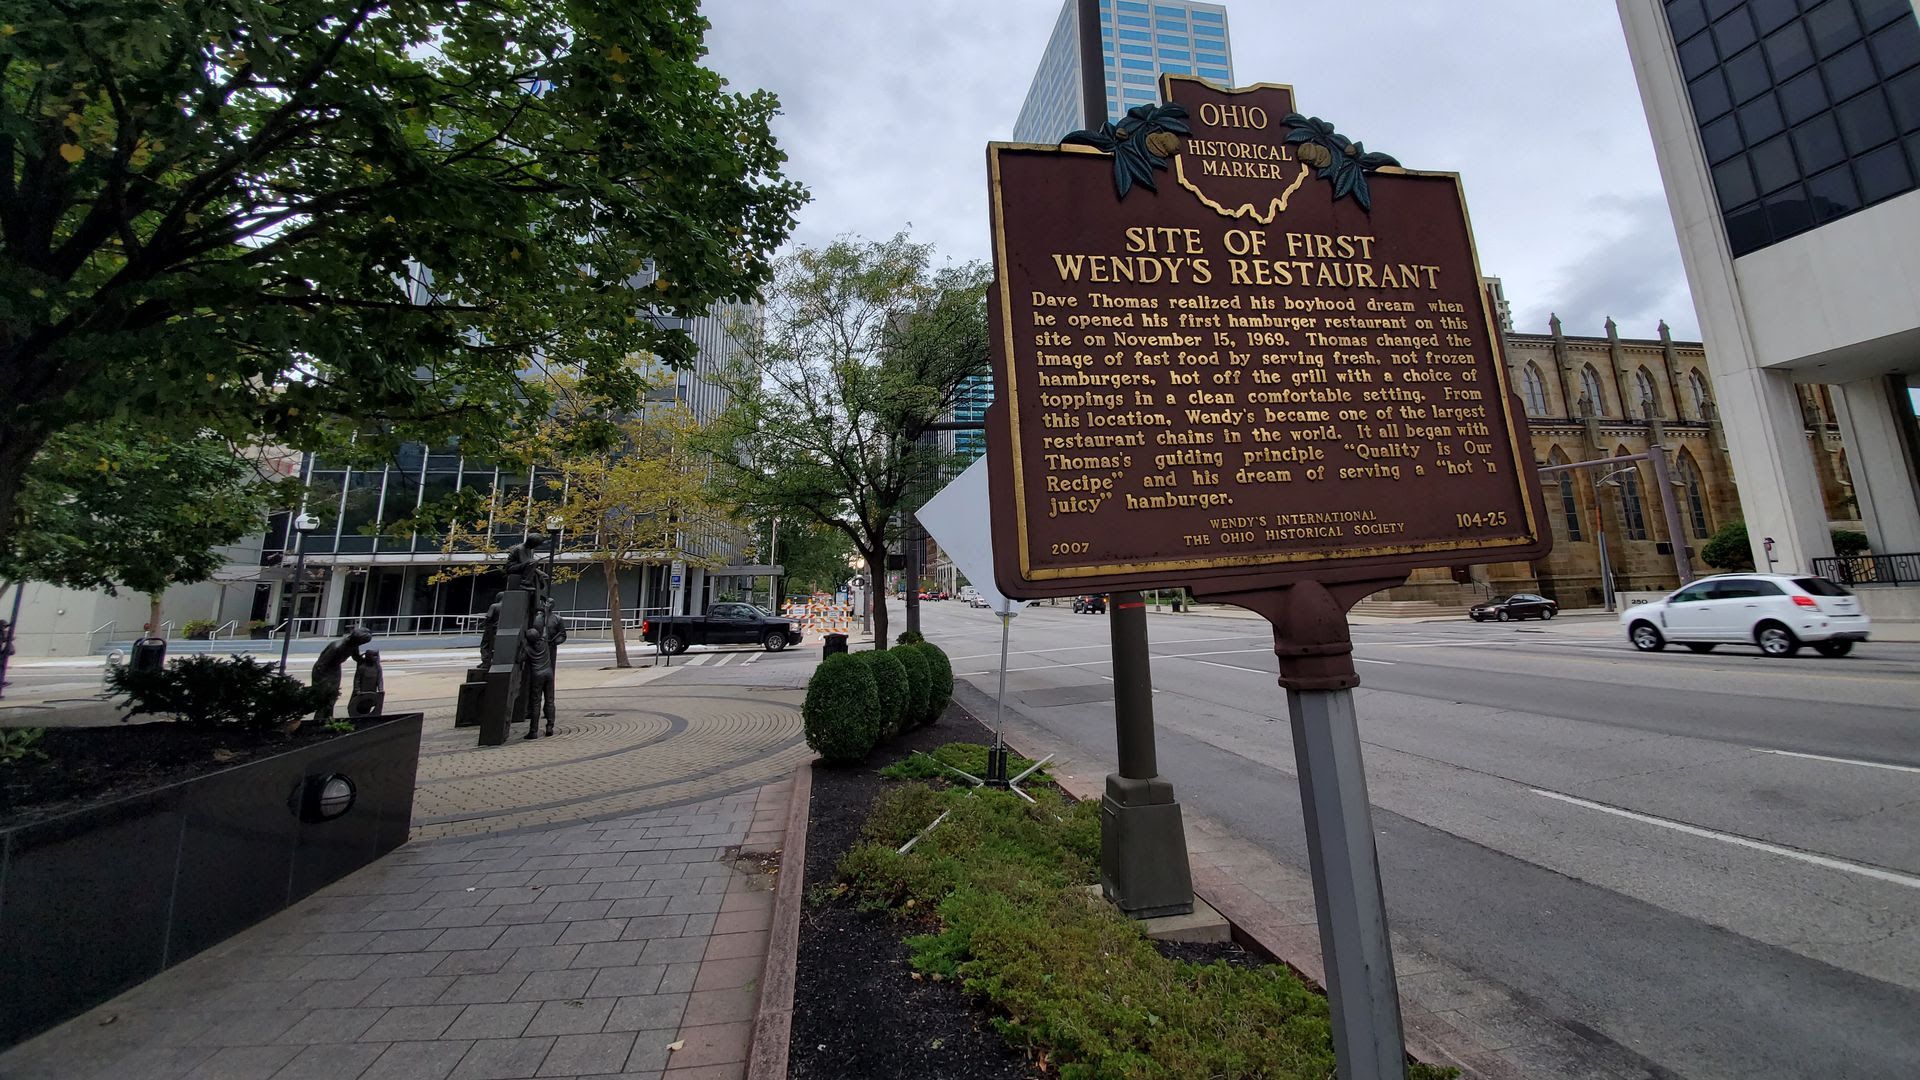 A historical marker for the "Site of First Wendy's Restaurant"